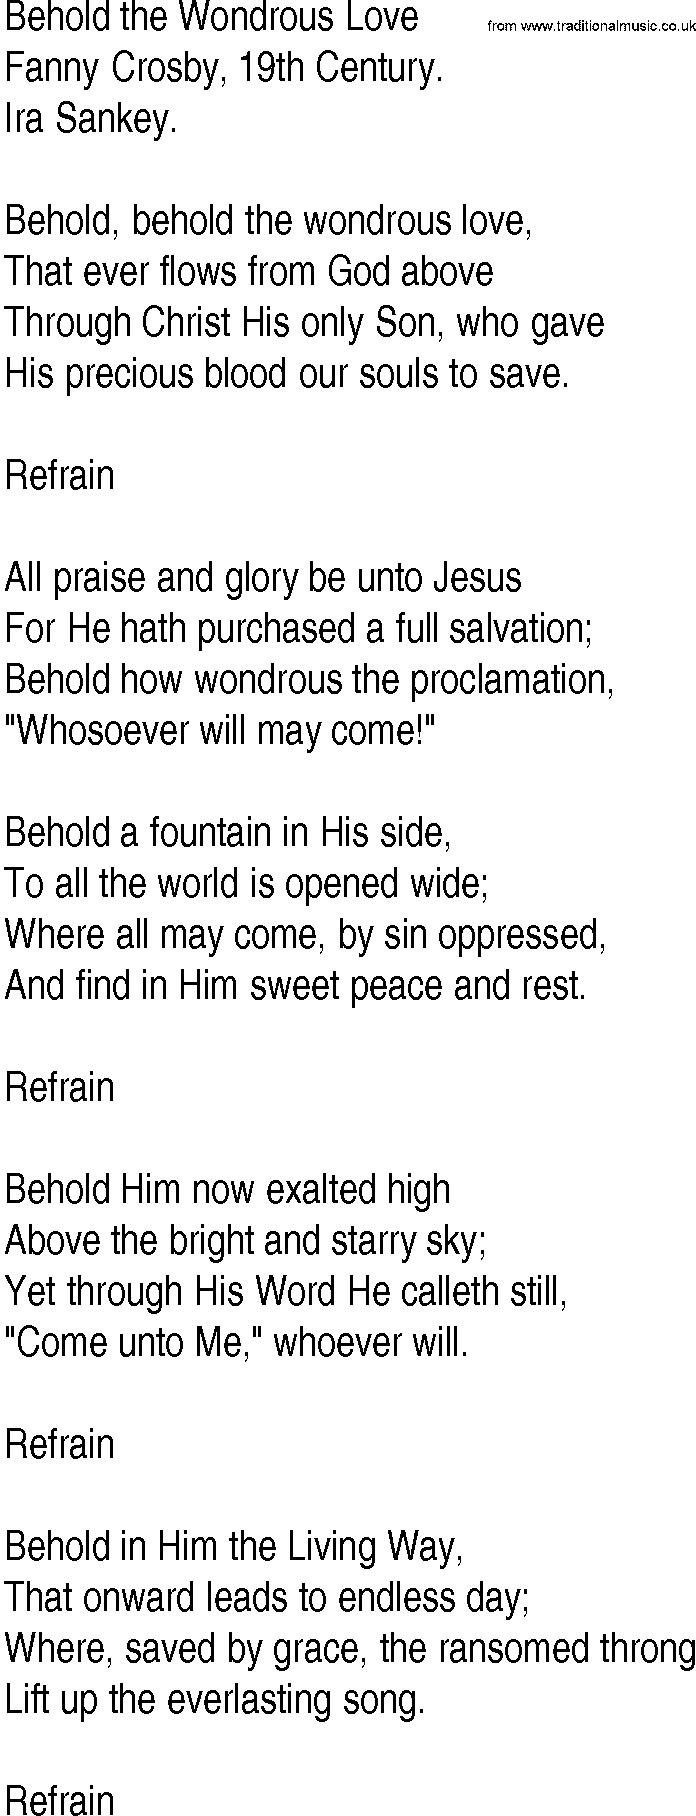 Hymn and Gospel Song: Behold the Wondrous Love by Fanny Crosby th Century lyrics